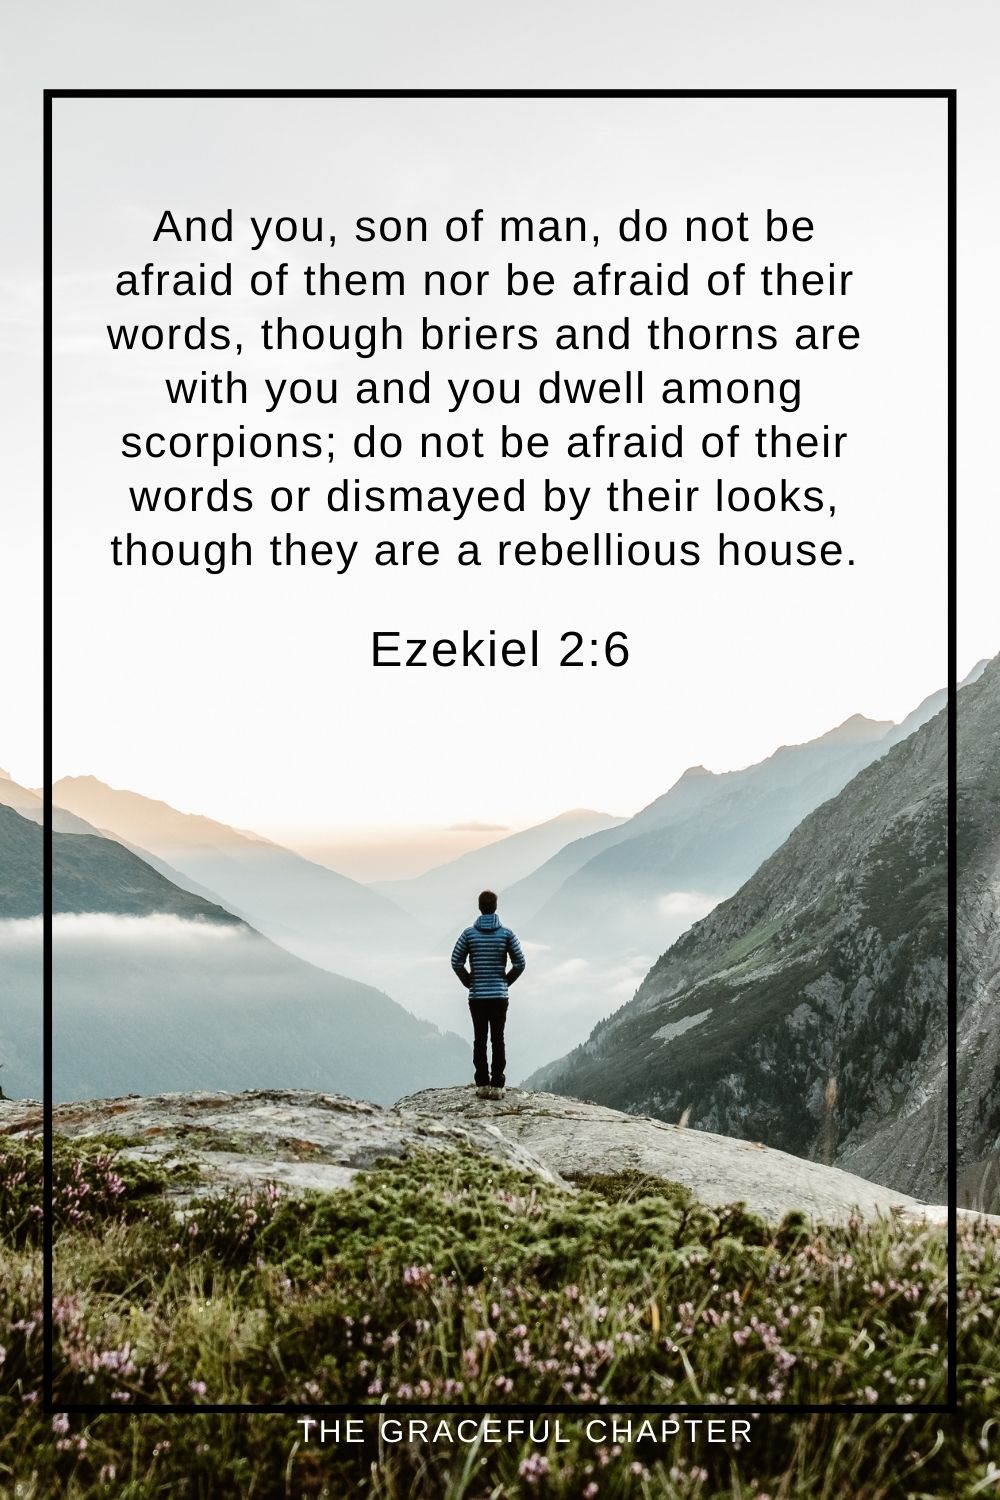 And you, son of man, do not be afraid of them nor be afraid of their words, though briers and thorns are with you and you dwell among scorpions; do not be afraid of their words or dismayed by their looks, though they are a rebellious house. Ezekiel 2:6